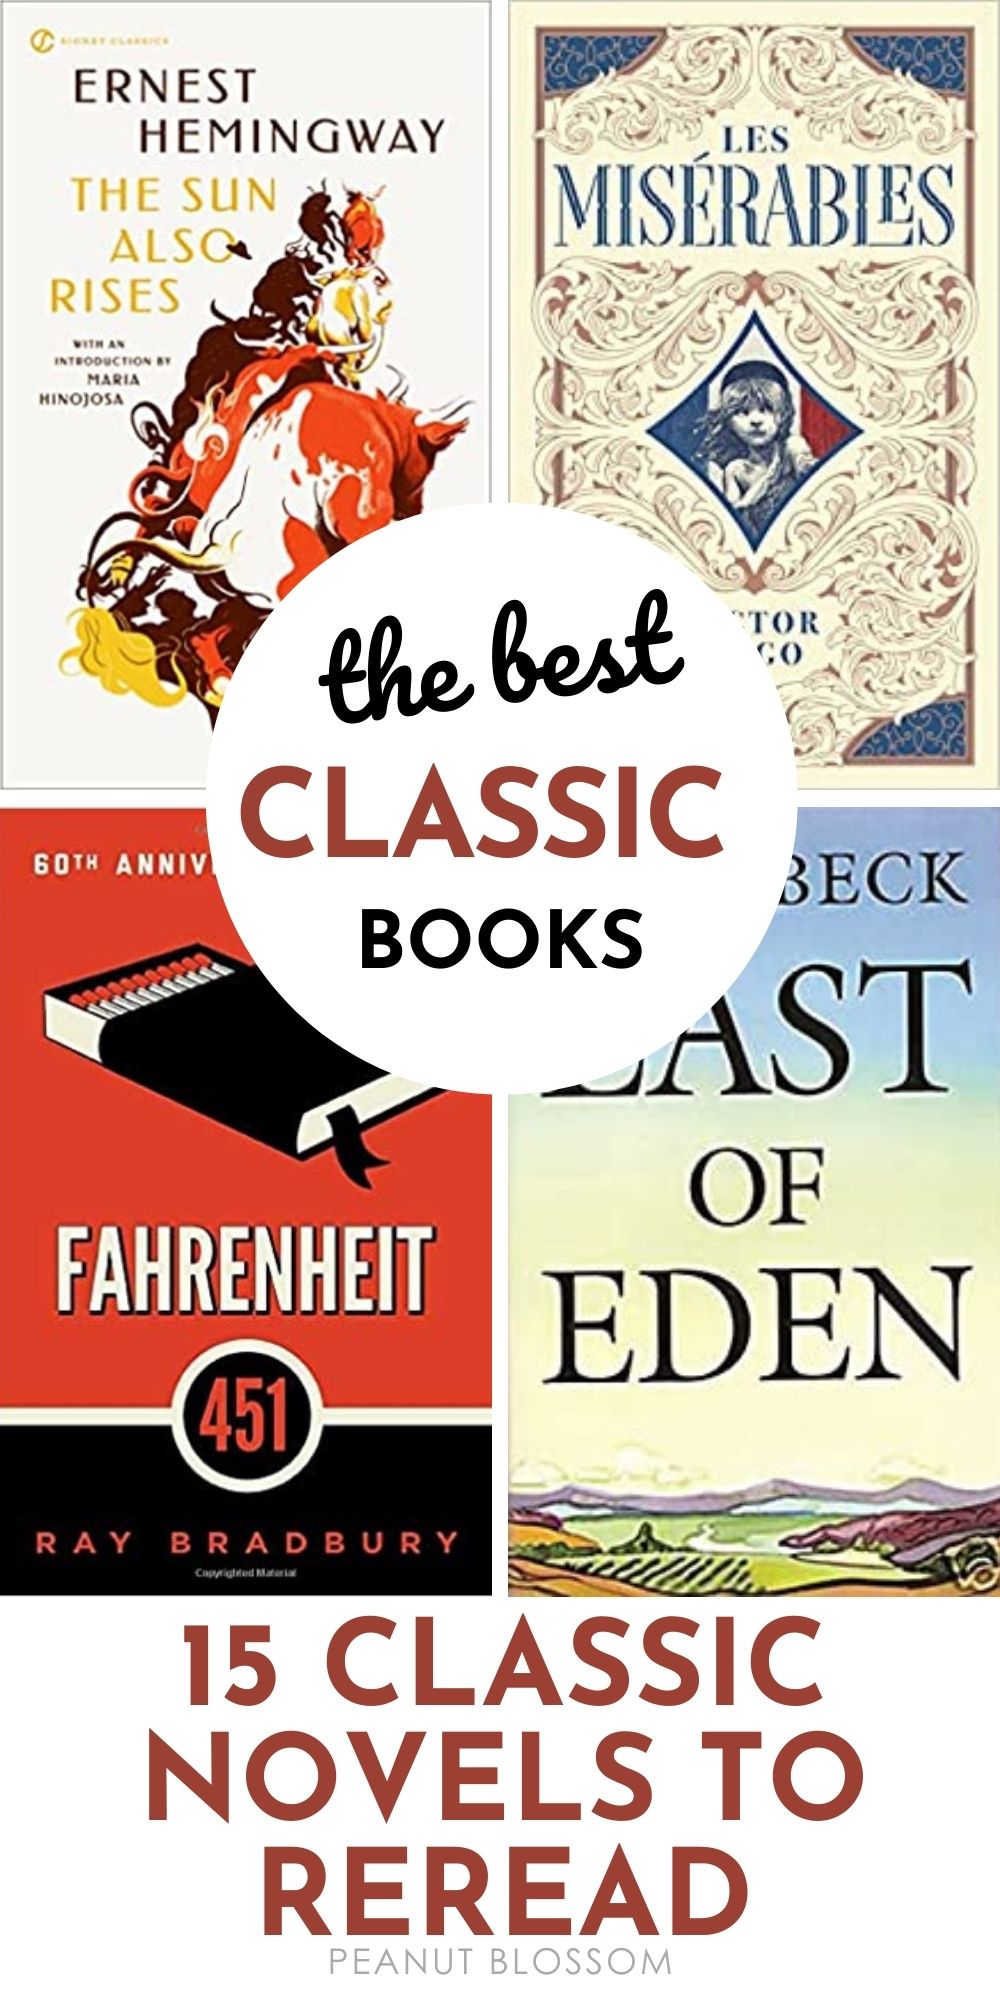 Collage of four books with text the best classic books: 15 classic novels to reread.